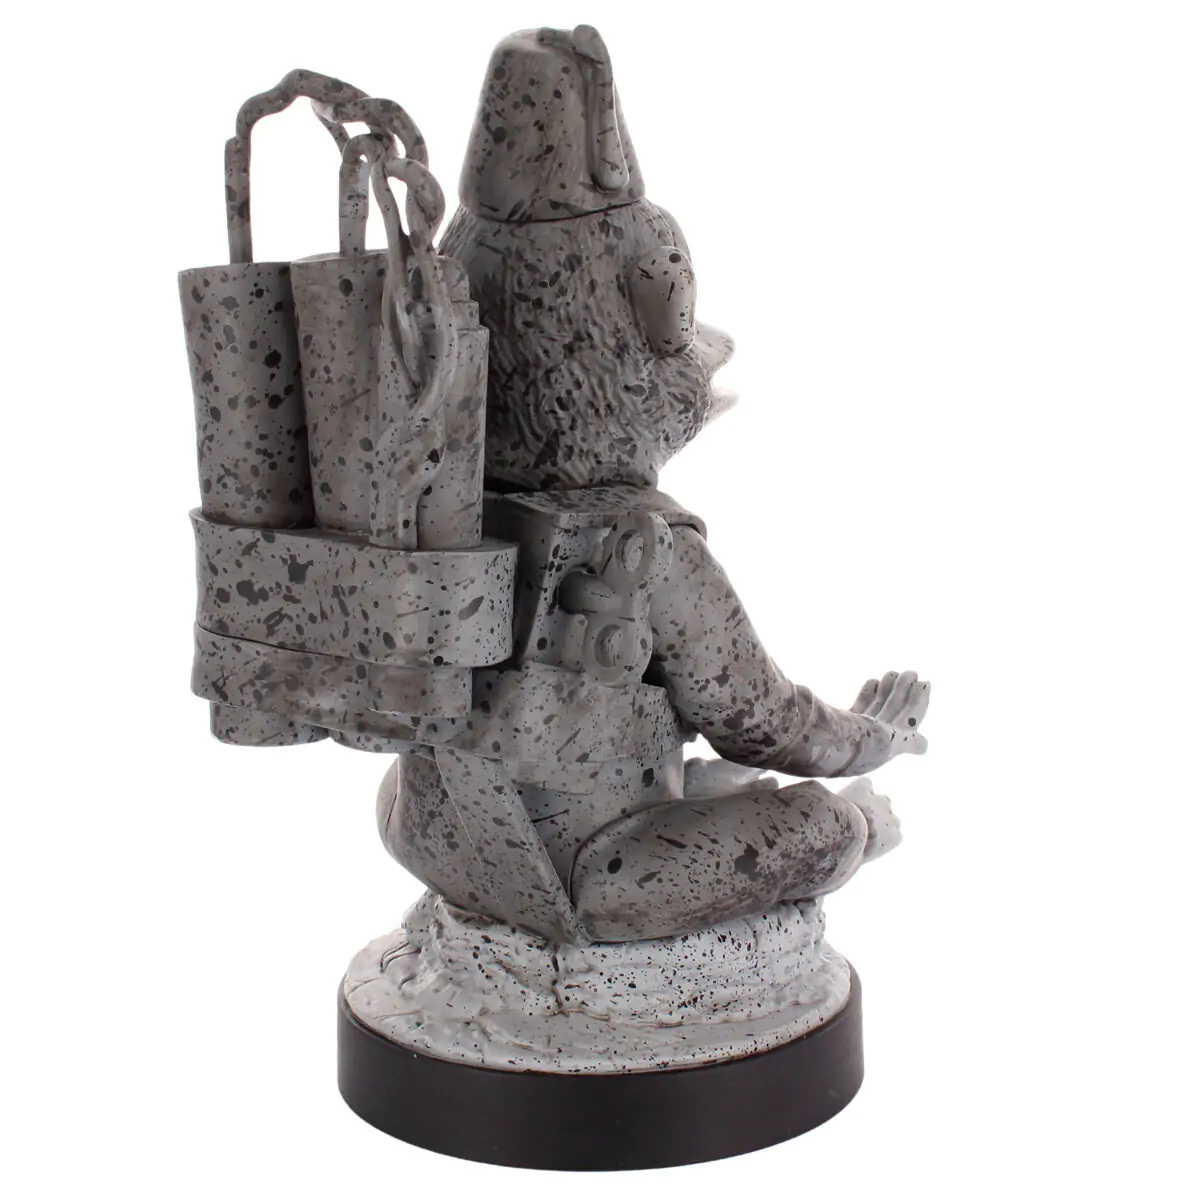 Call of Duty Toasted Monkey Bomb figure clamping bracket Cable guy 21cm termékfotó